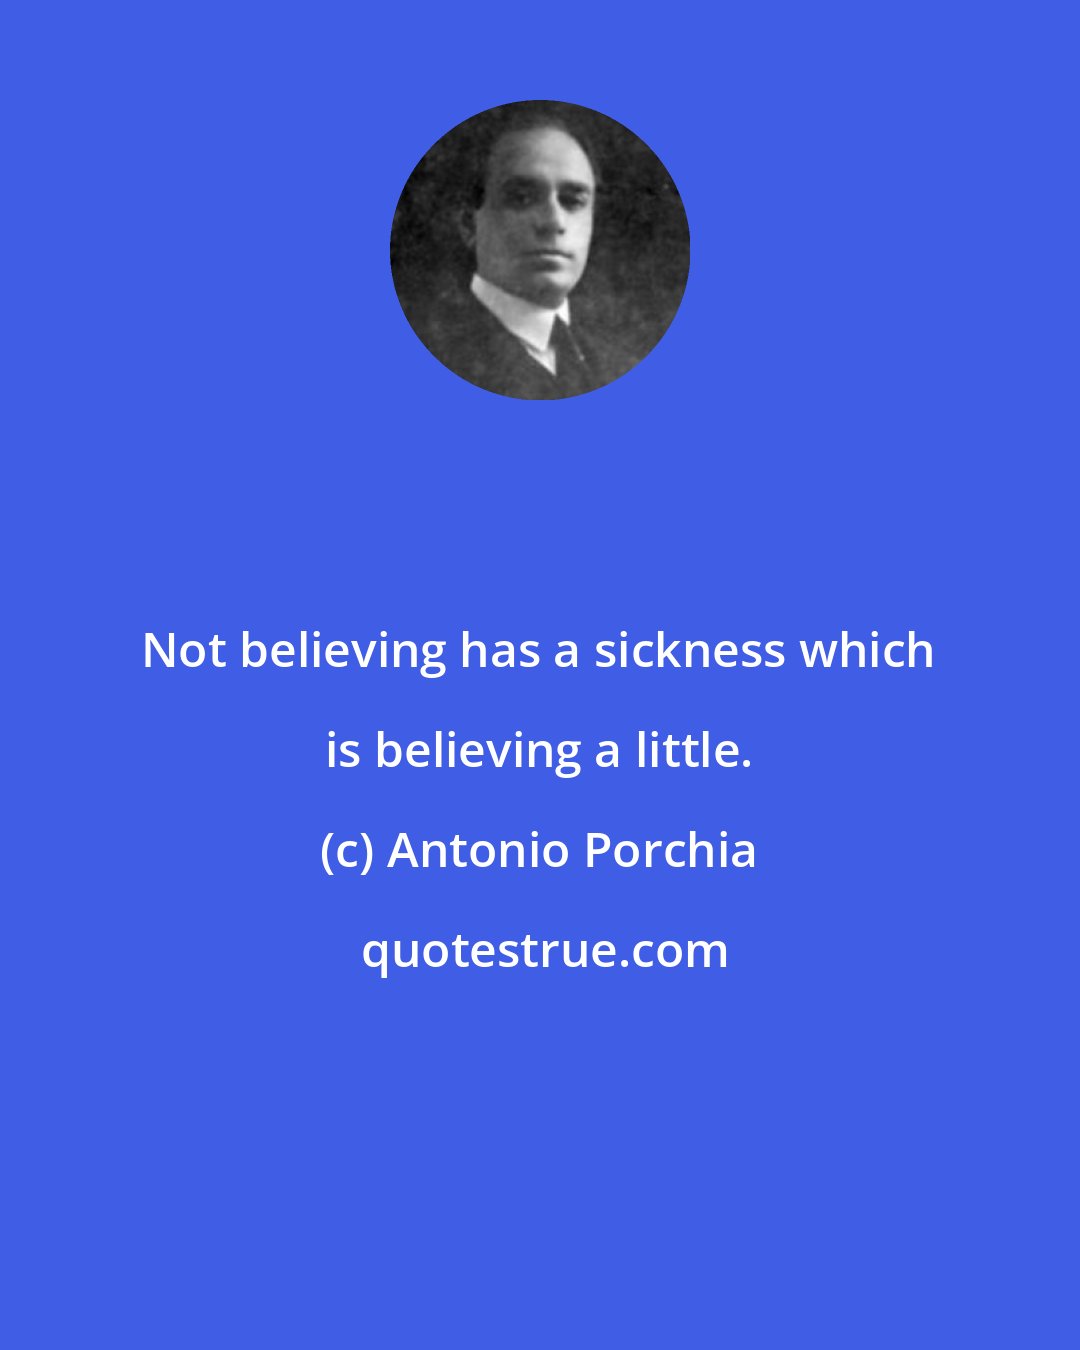 Antonio Porchia: Not believing has a sickness which is believing a little.